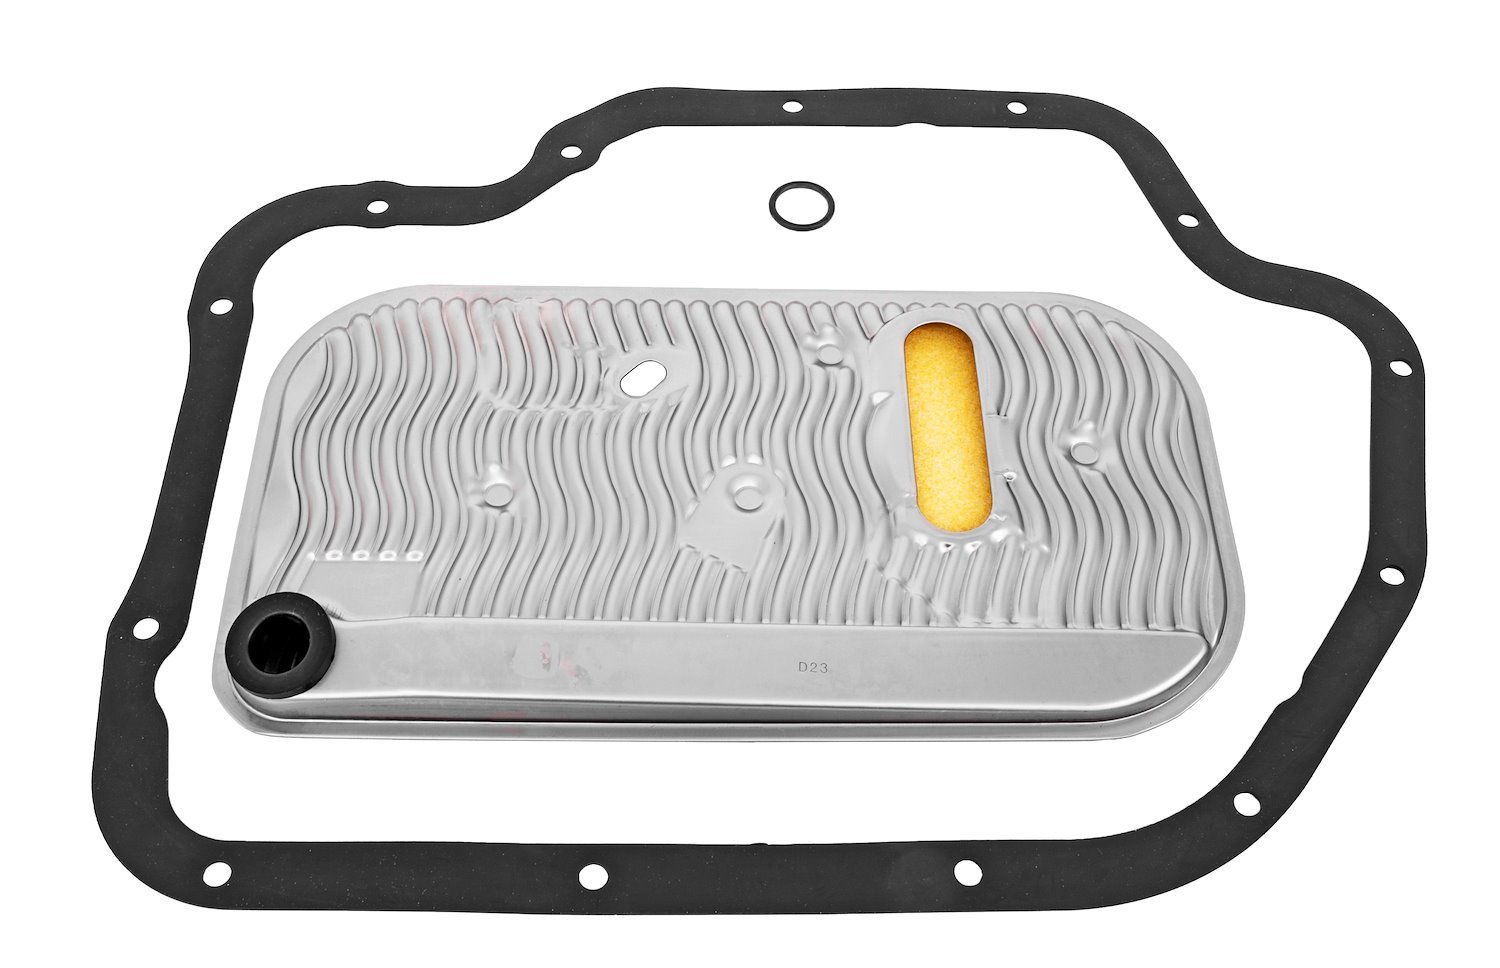 Transmission Filter and Gasket Kit for TH400 Chevy,